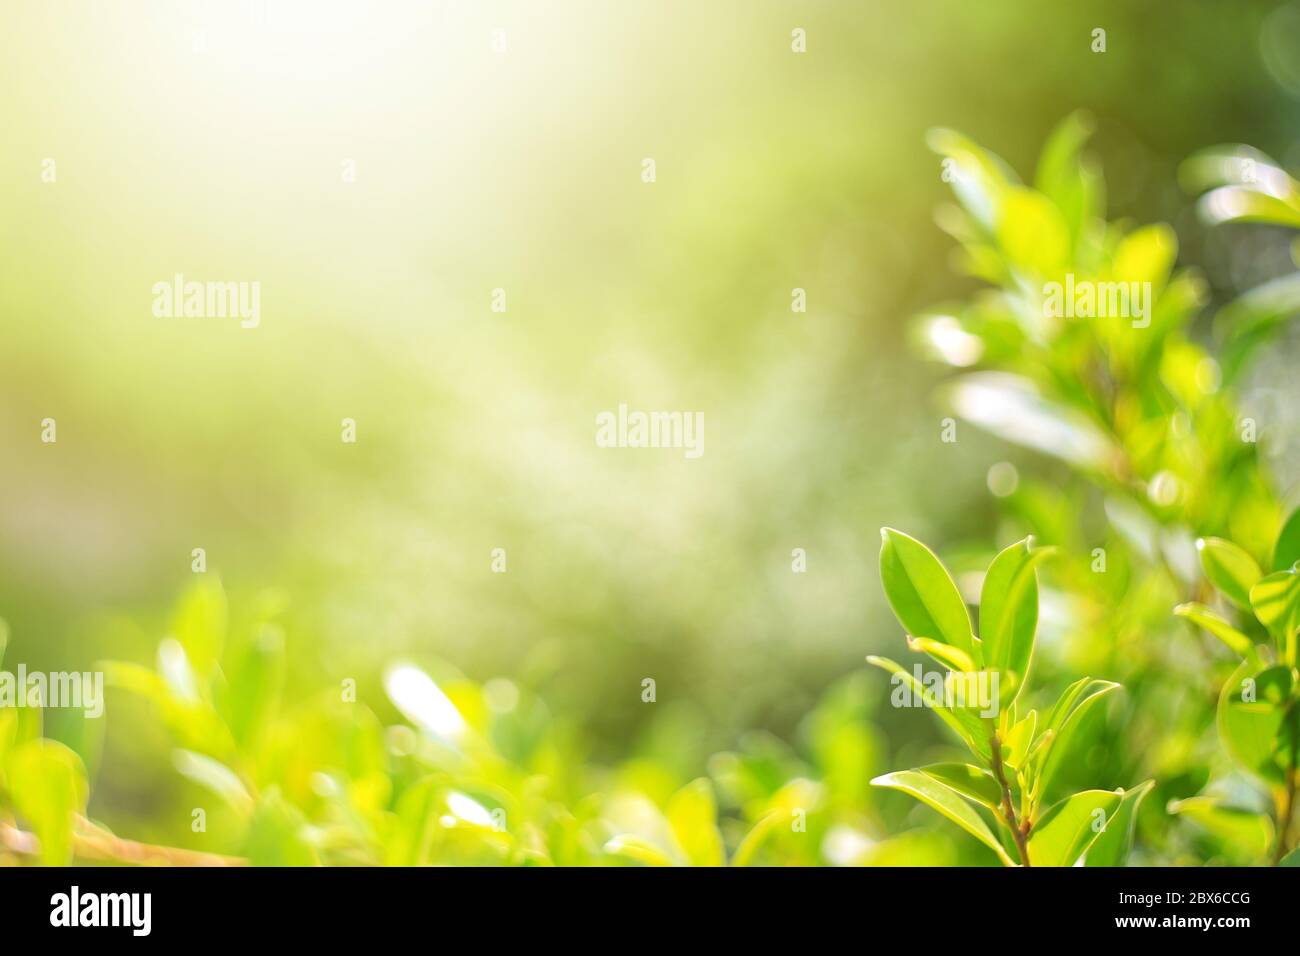 Nature leaf green in the garden.Concept organic leaves green and clean ecology in summer sunlight plants landscape. bokeh blurred bright green use tex Stock Photo